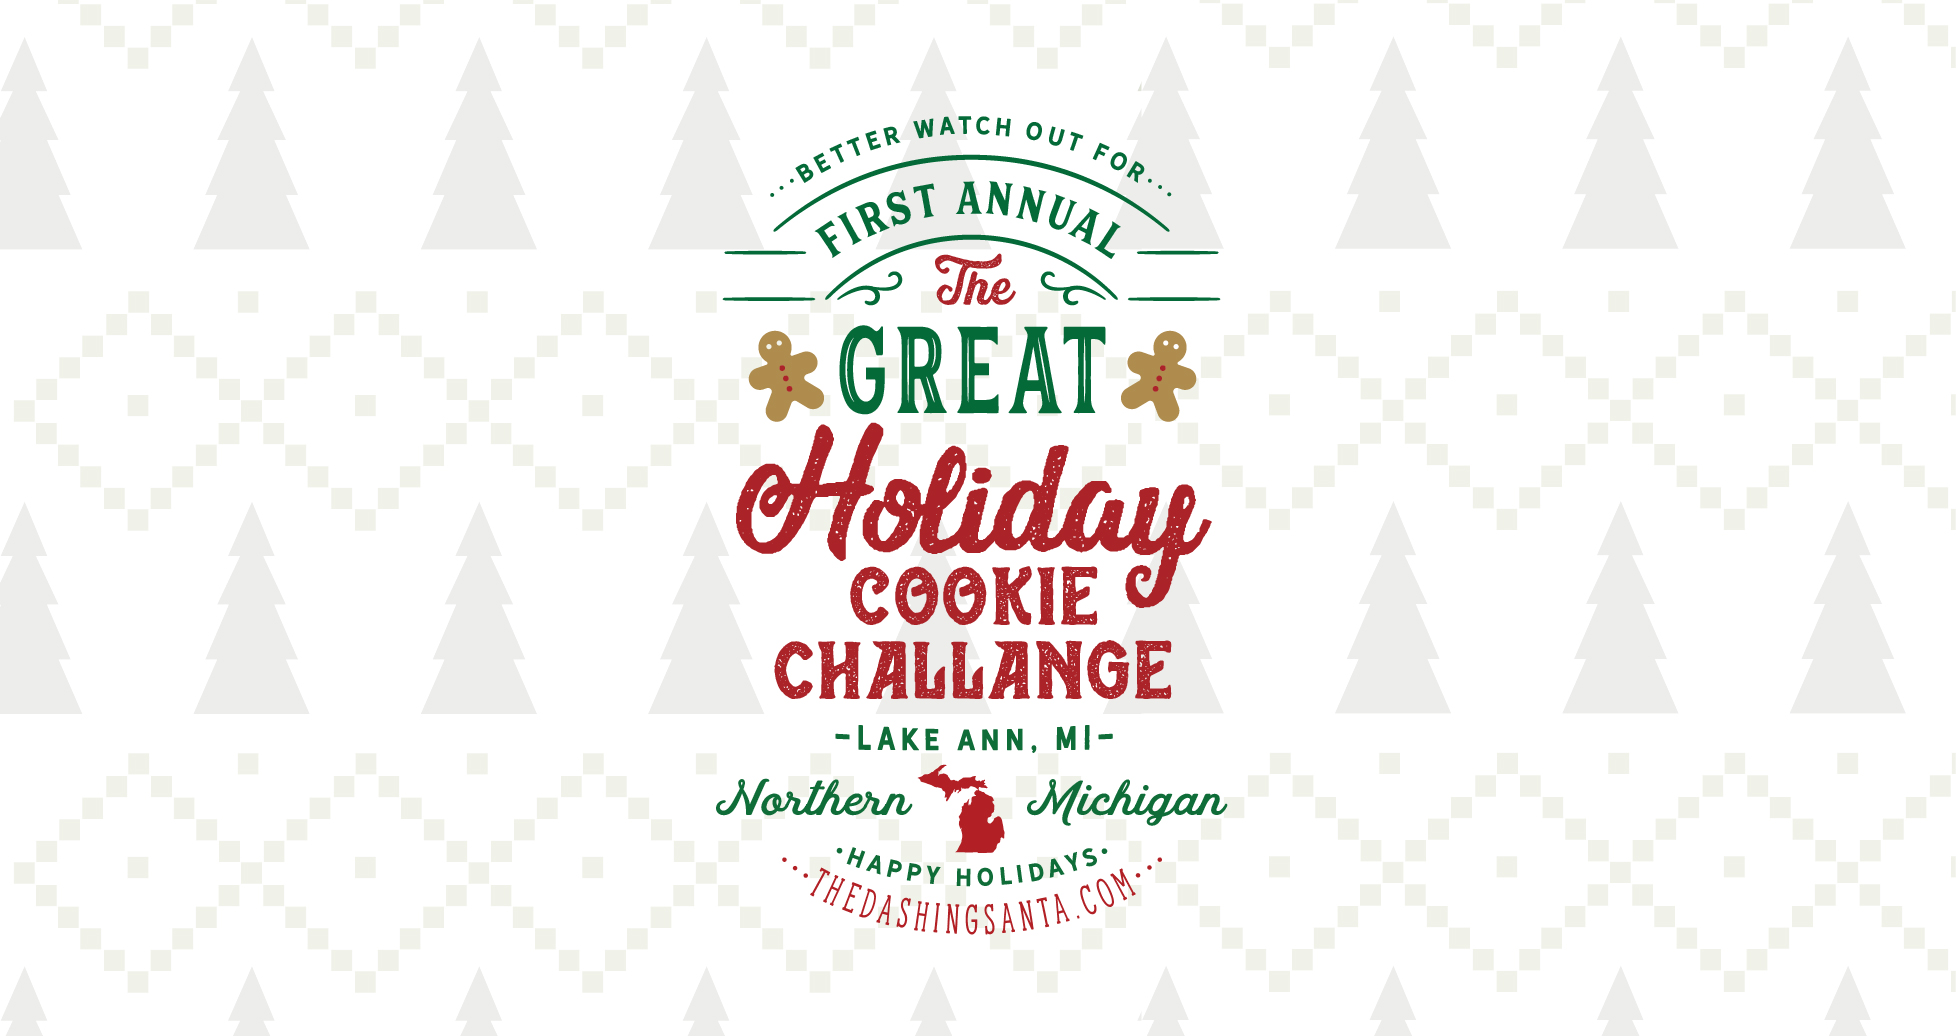 The Great Holiday Cookie Challenge in Lake Ann, MI